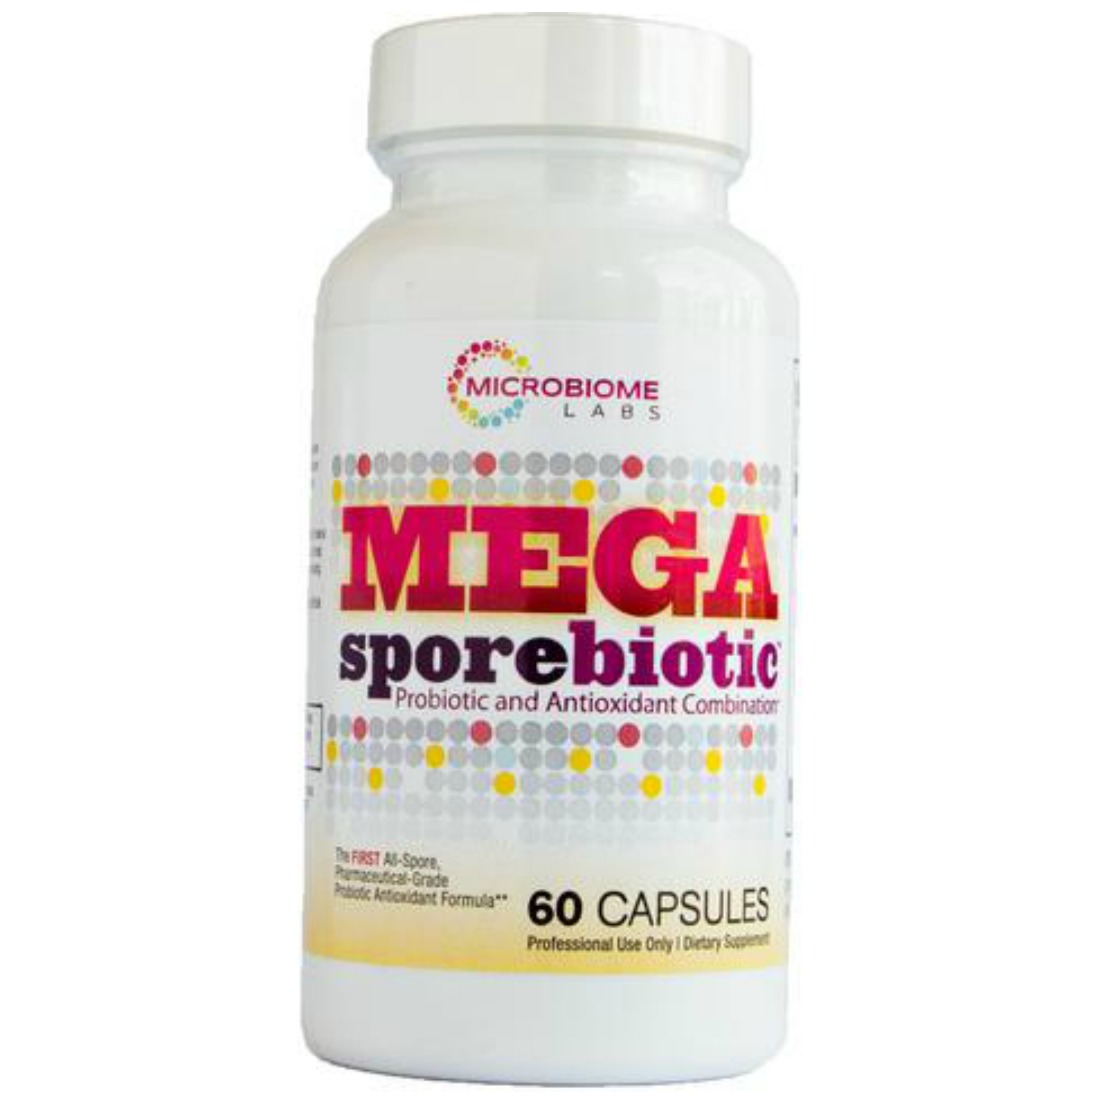 Clinically Tested MegaSpore Spore Based Probiotic